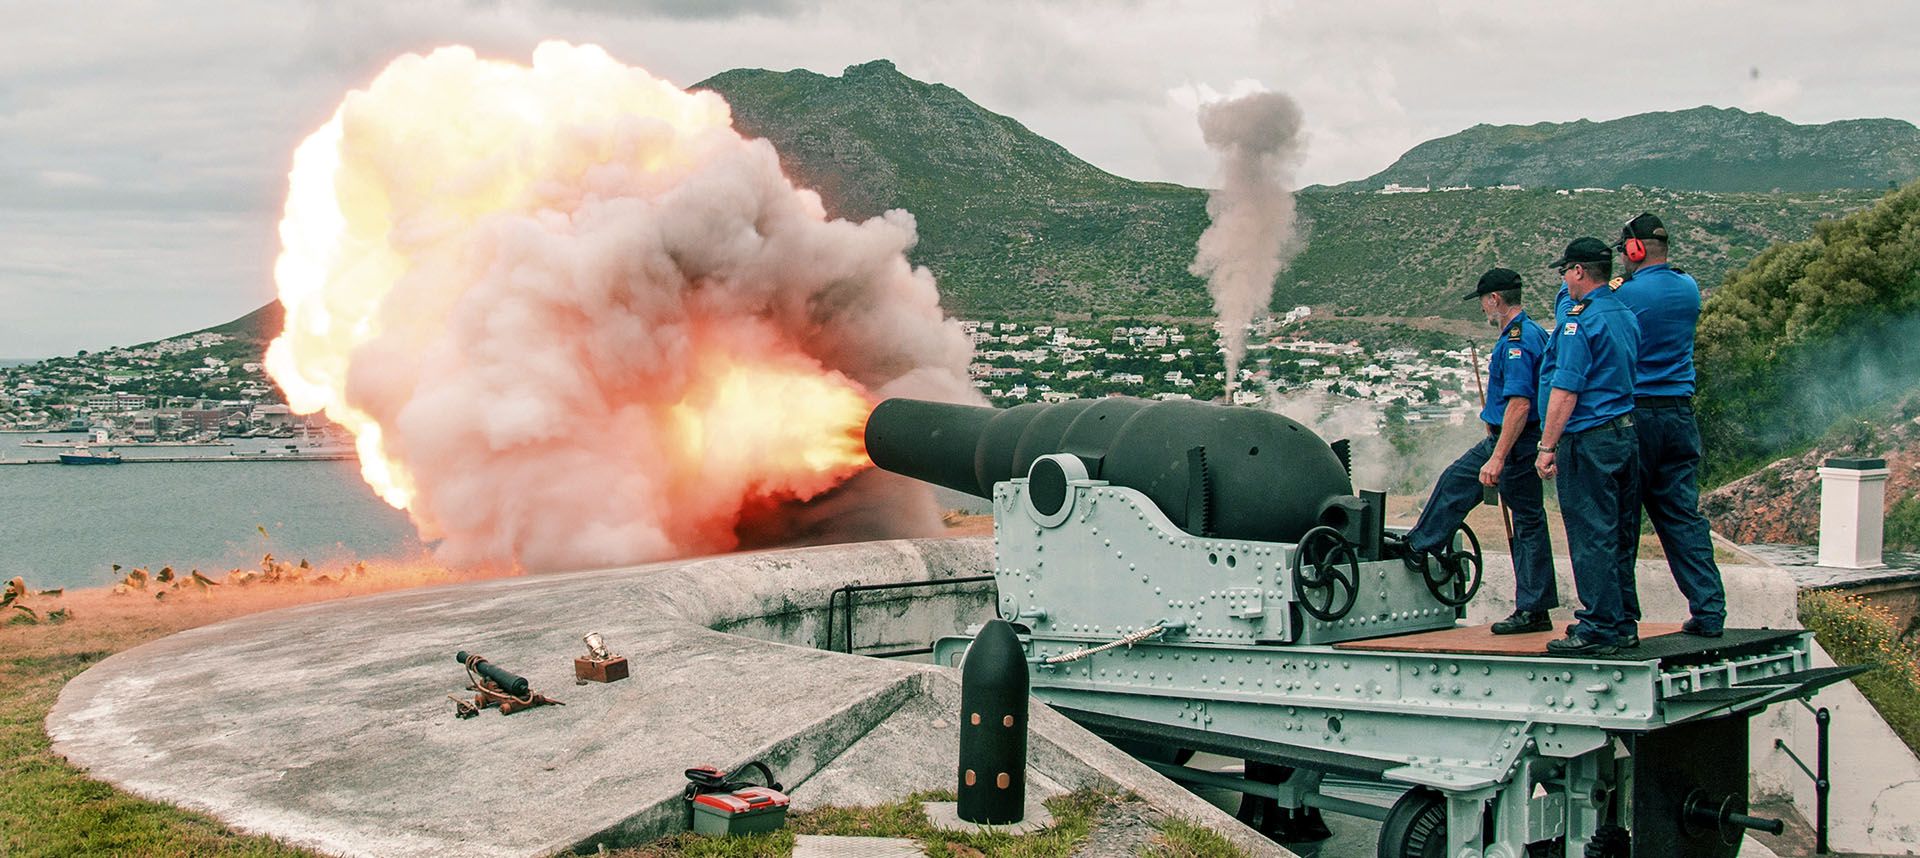 Freedom Day: Firing Of 9 Inch Muzzle Loading Cannon